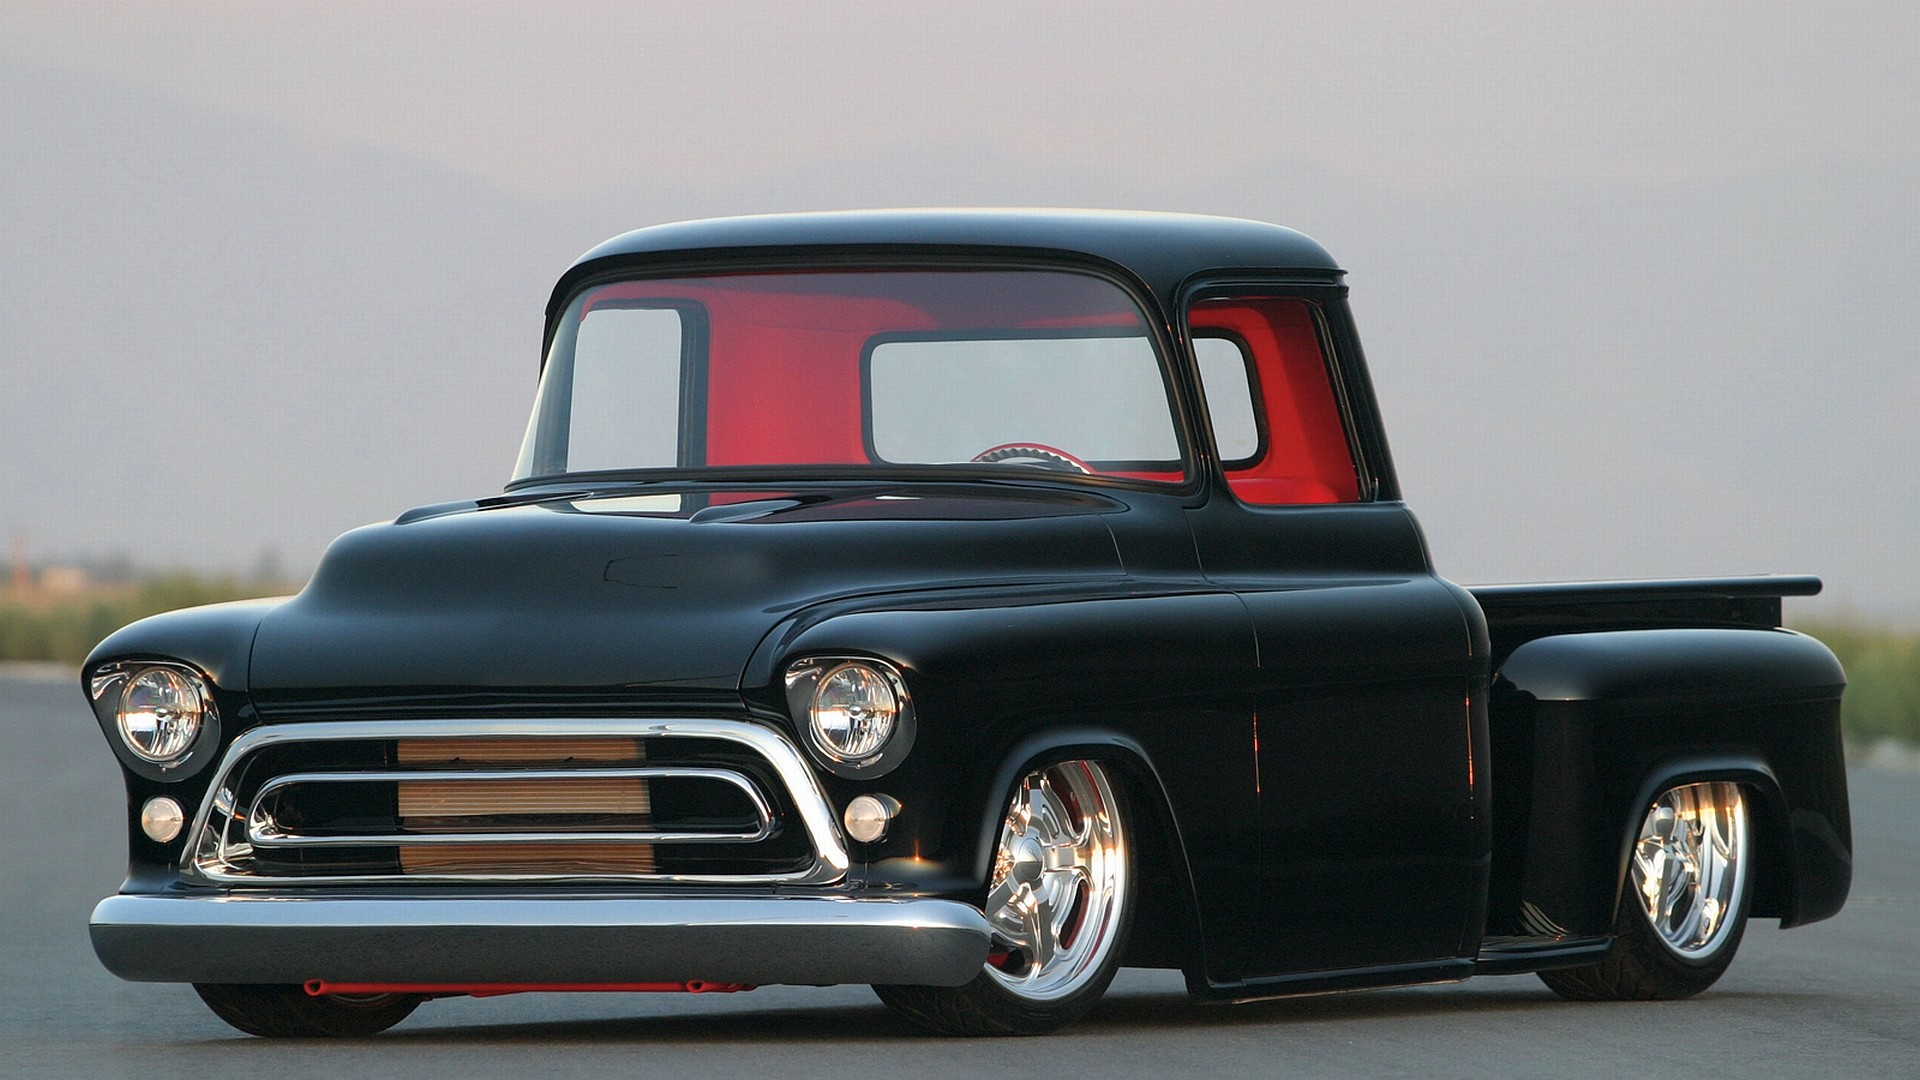 1920x1080 chevy Wallpaper Background 42342 